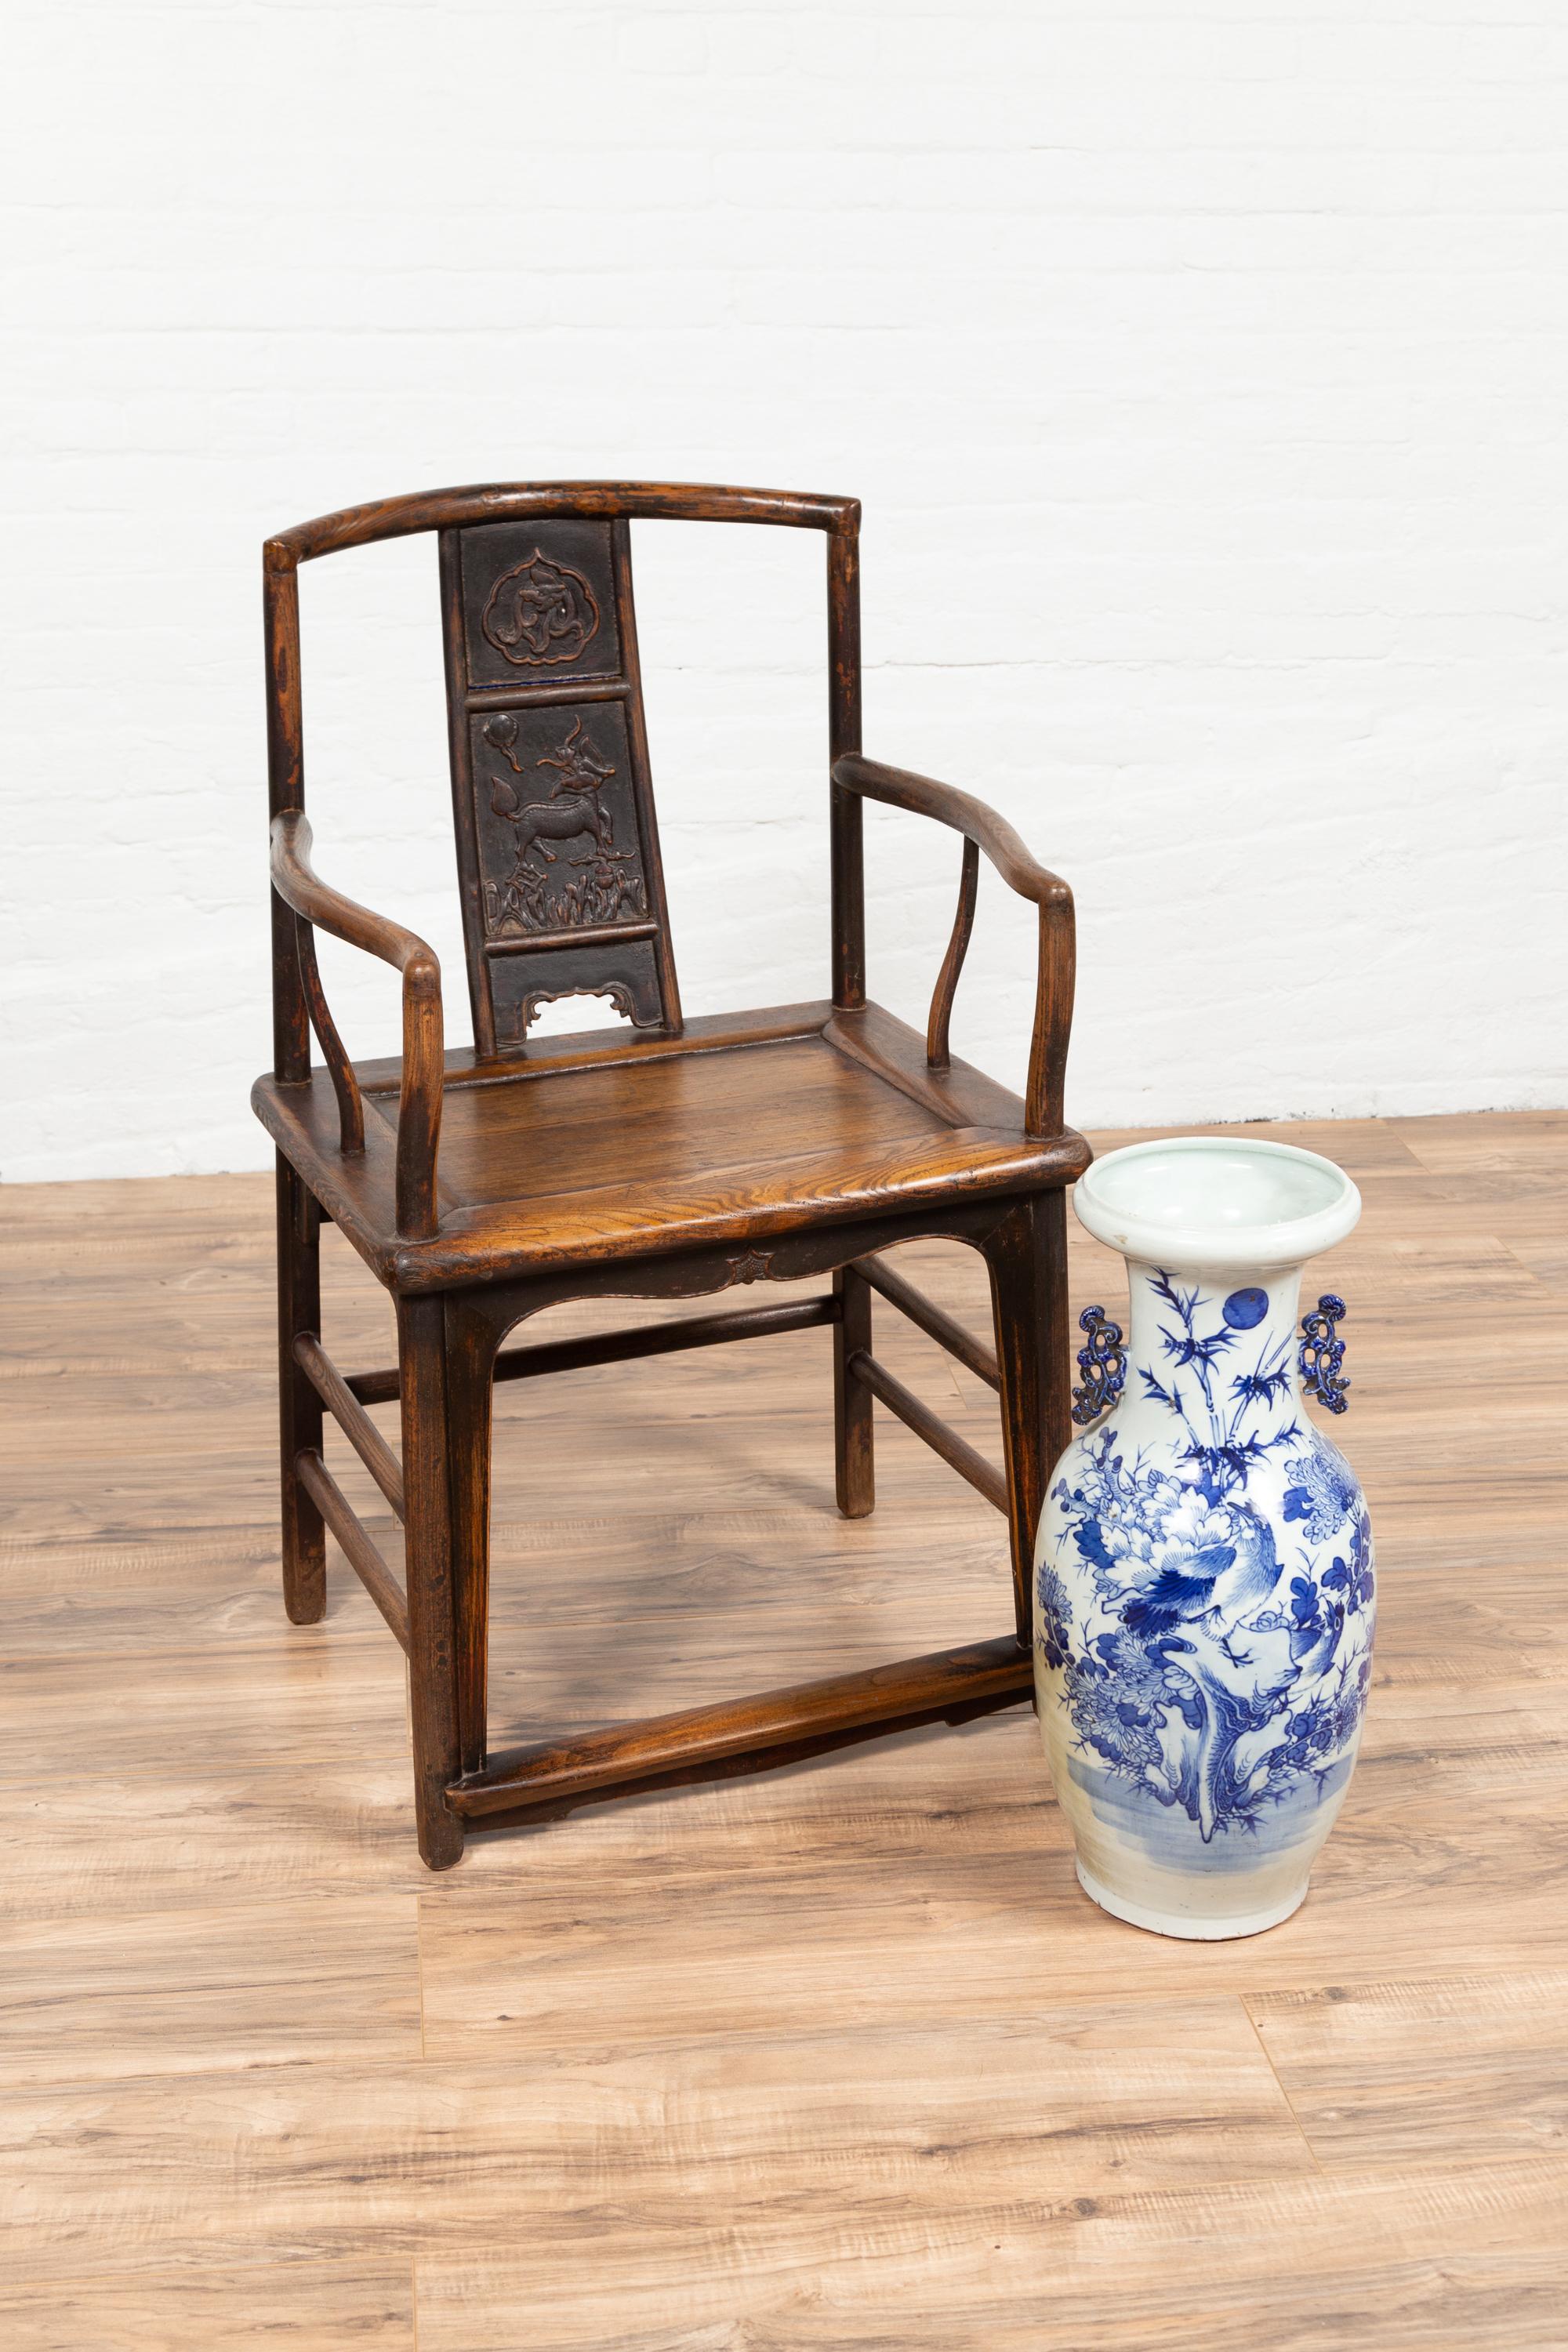 A Chinese Ming Dynasty style elmwood wedding chair from the early 20th century, with carved panels on the splat, curved arms, and gooseneck front posts. Born in China during the early years of the 20th century, this antique elm wedding chair